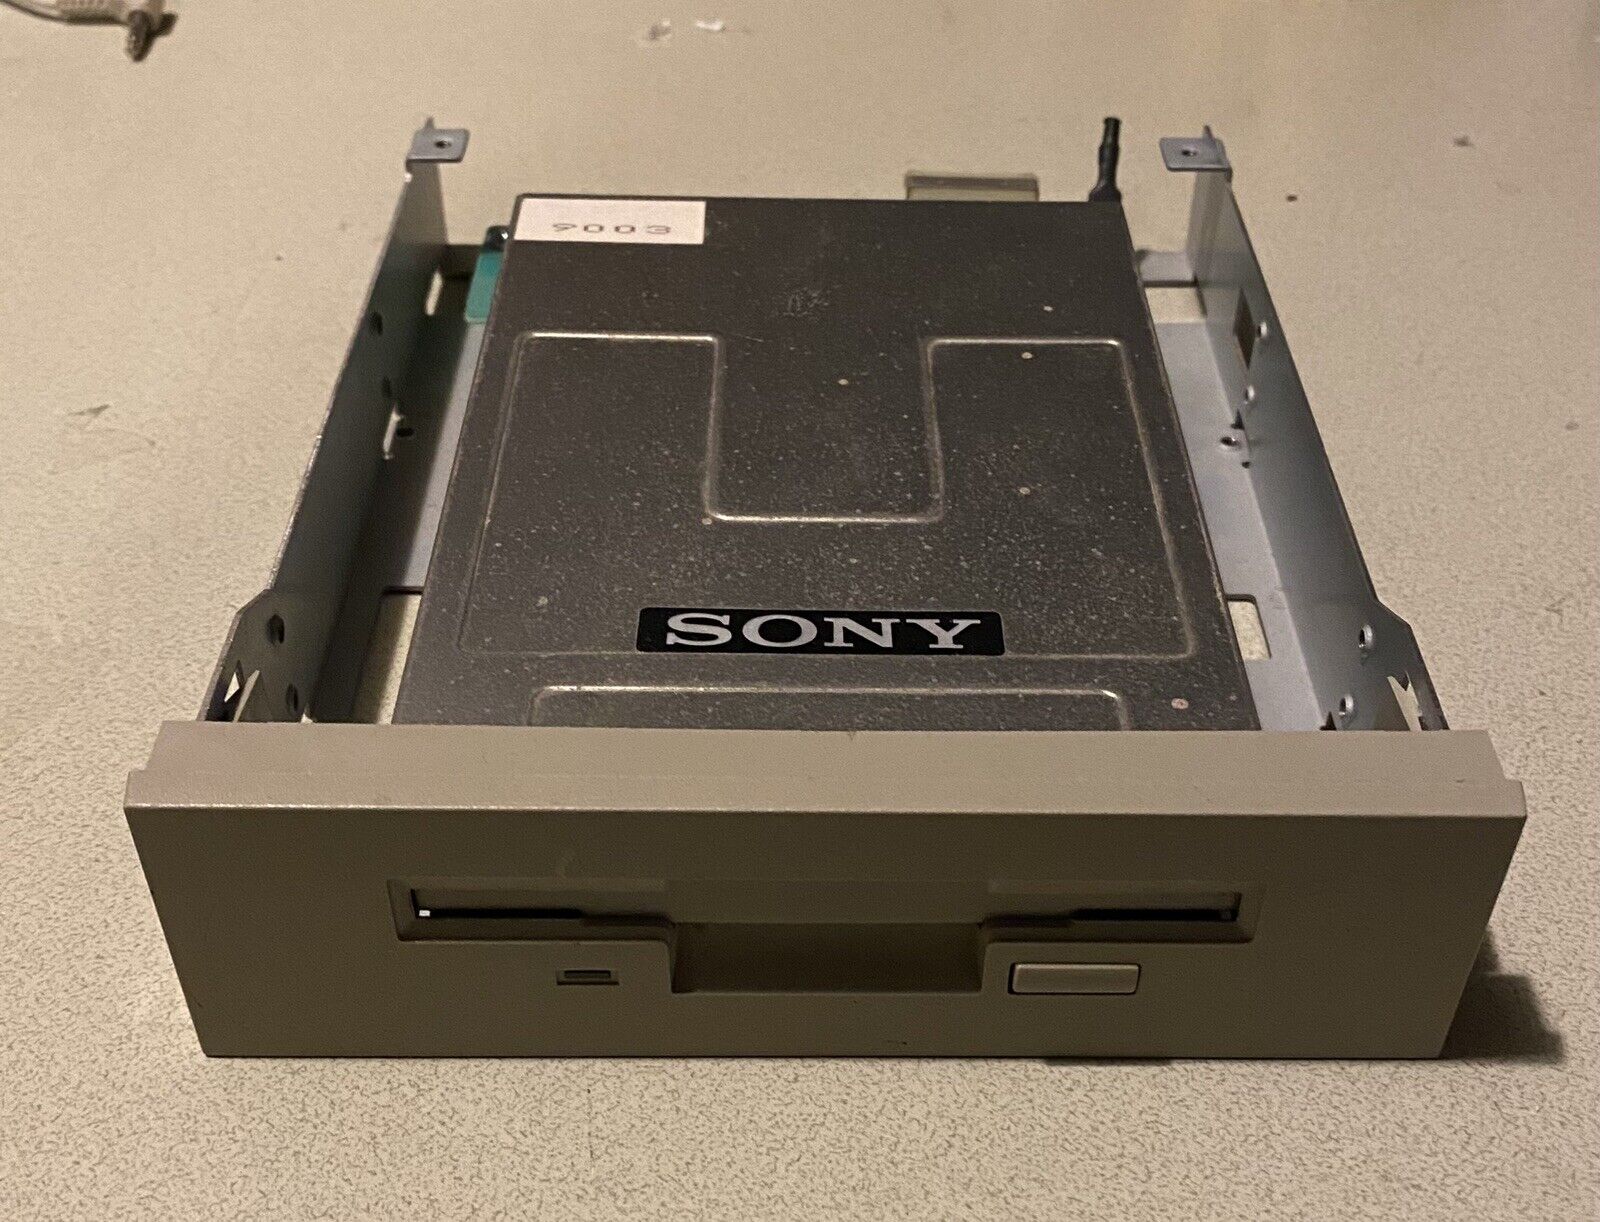 SONY MP-F17W-55 3.5” Floppy Drive *Tested And Working* Vintage